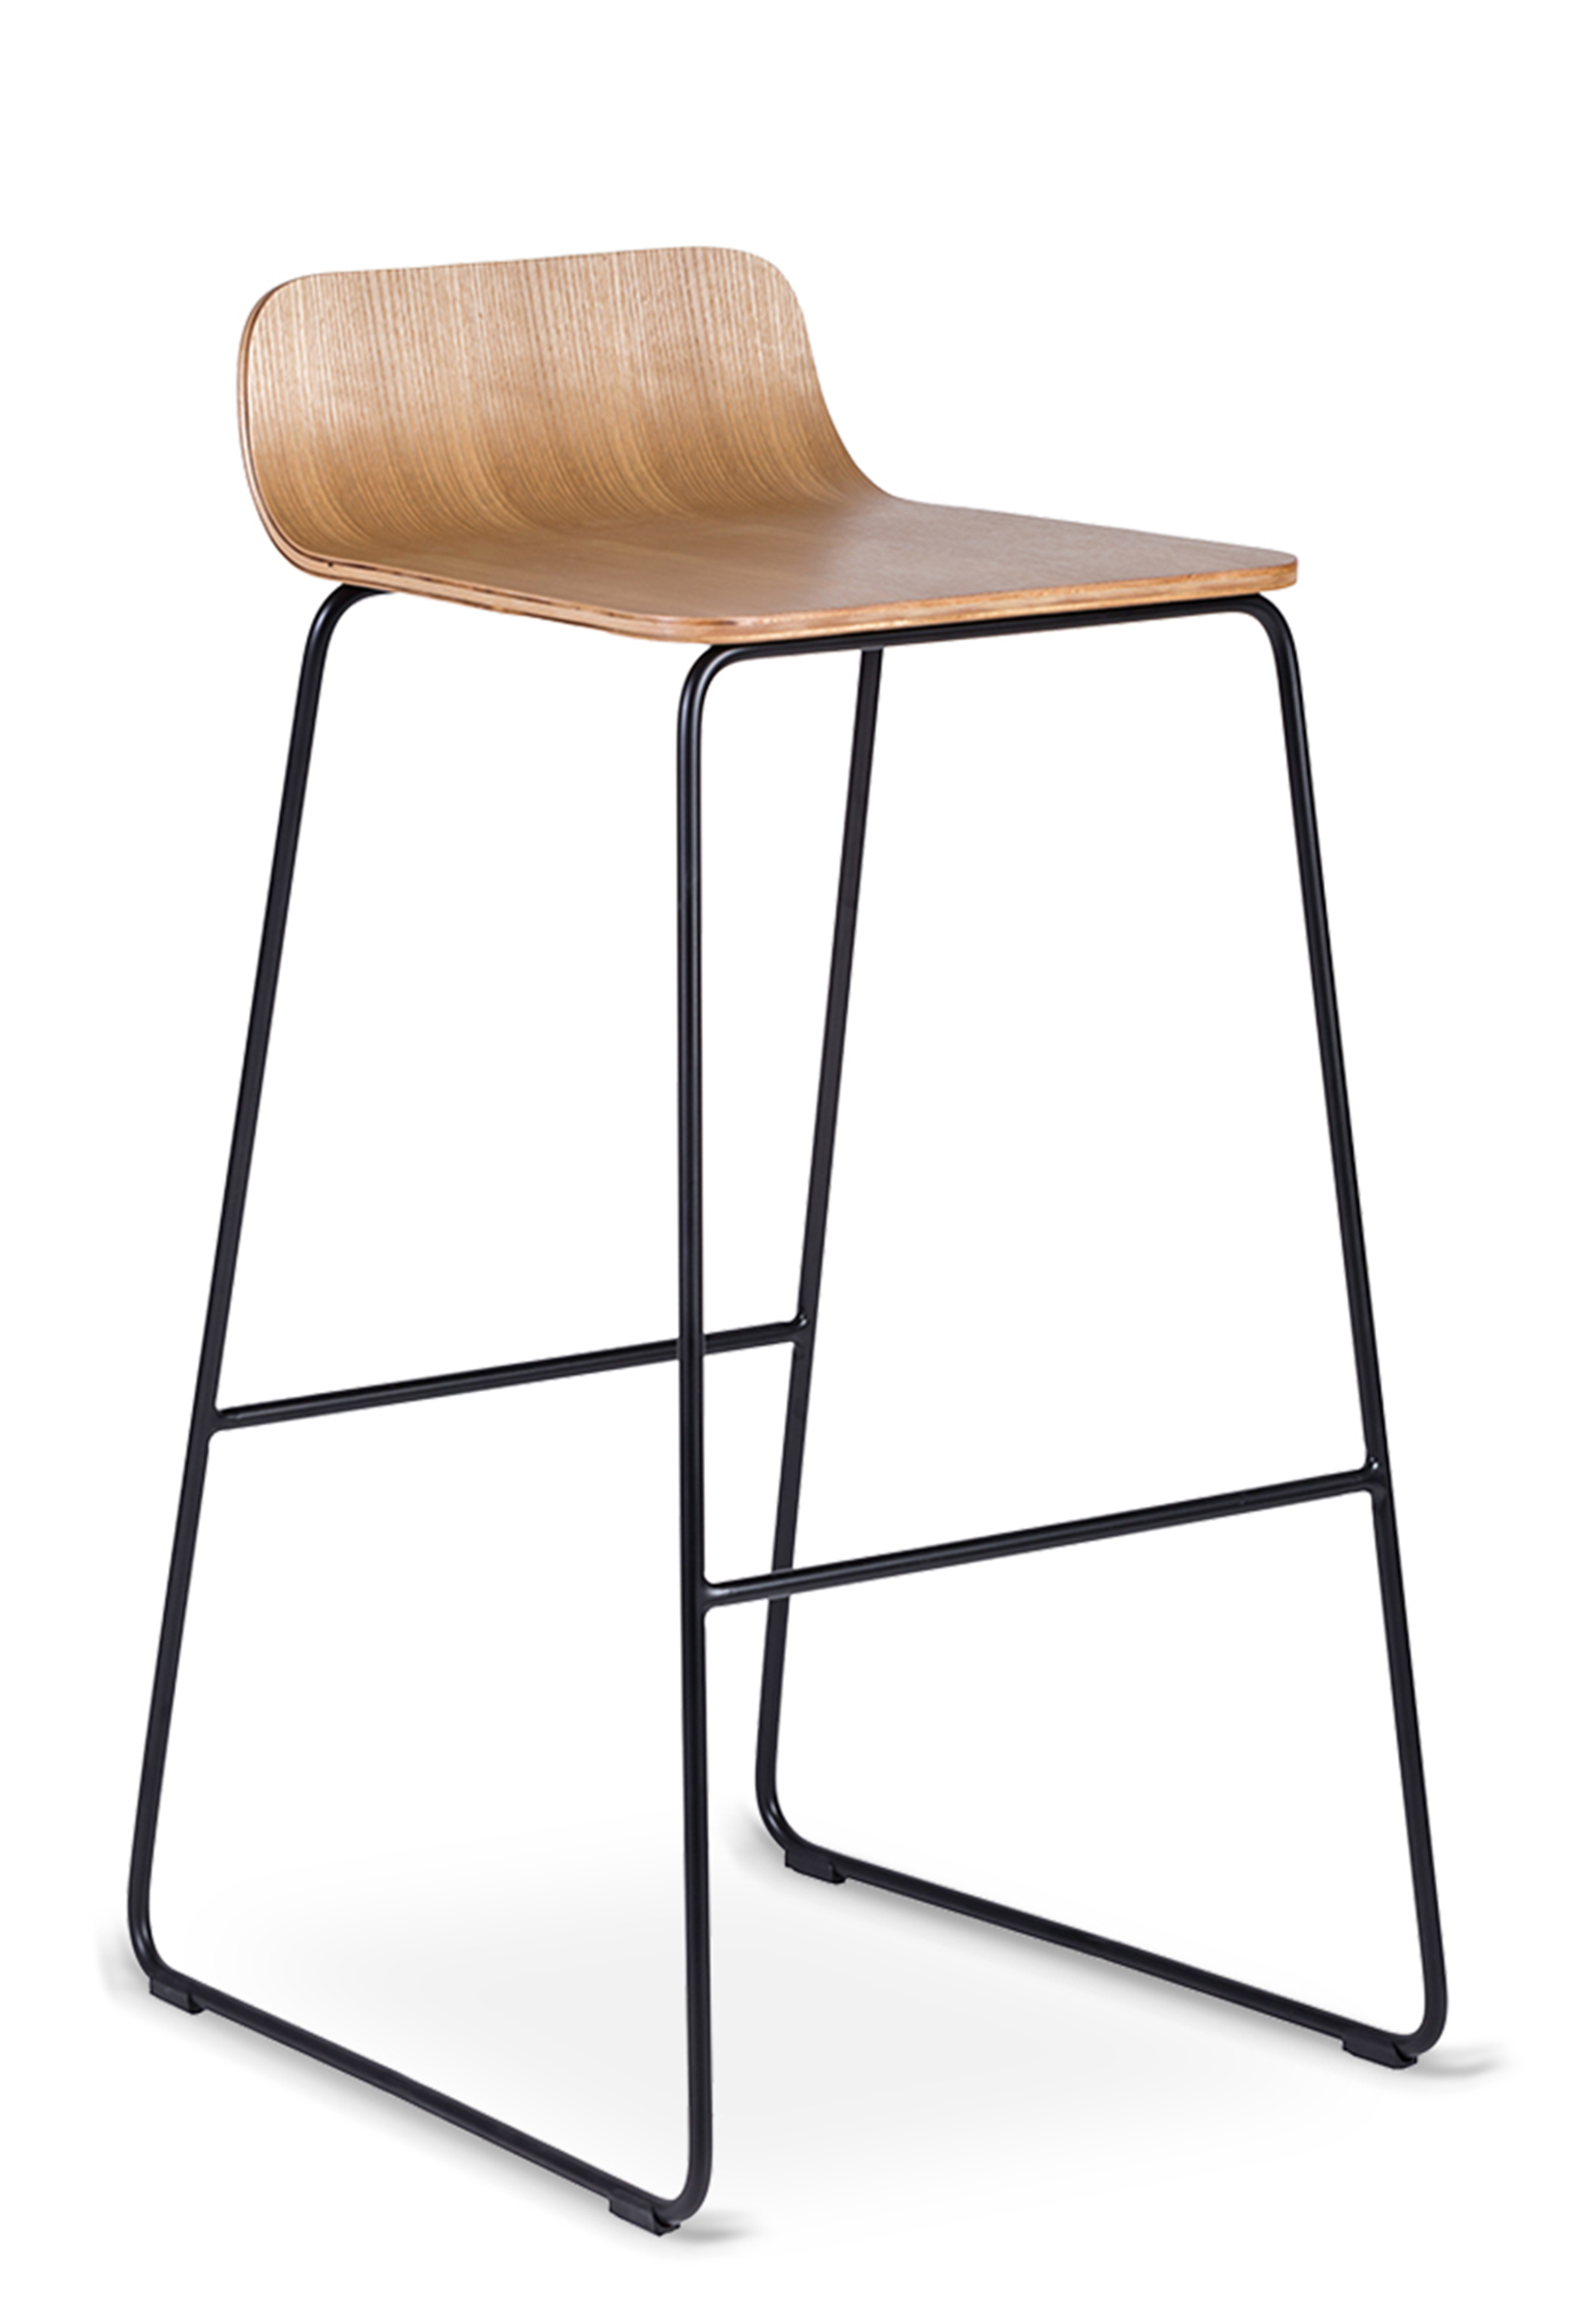 WS - Lolli high stool - Natural ash (Front angle)